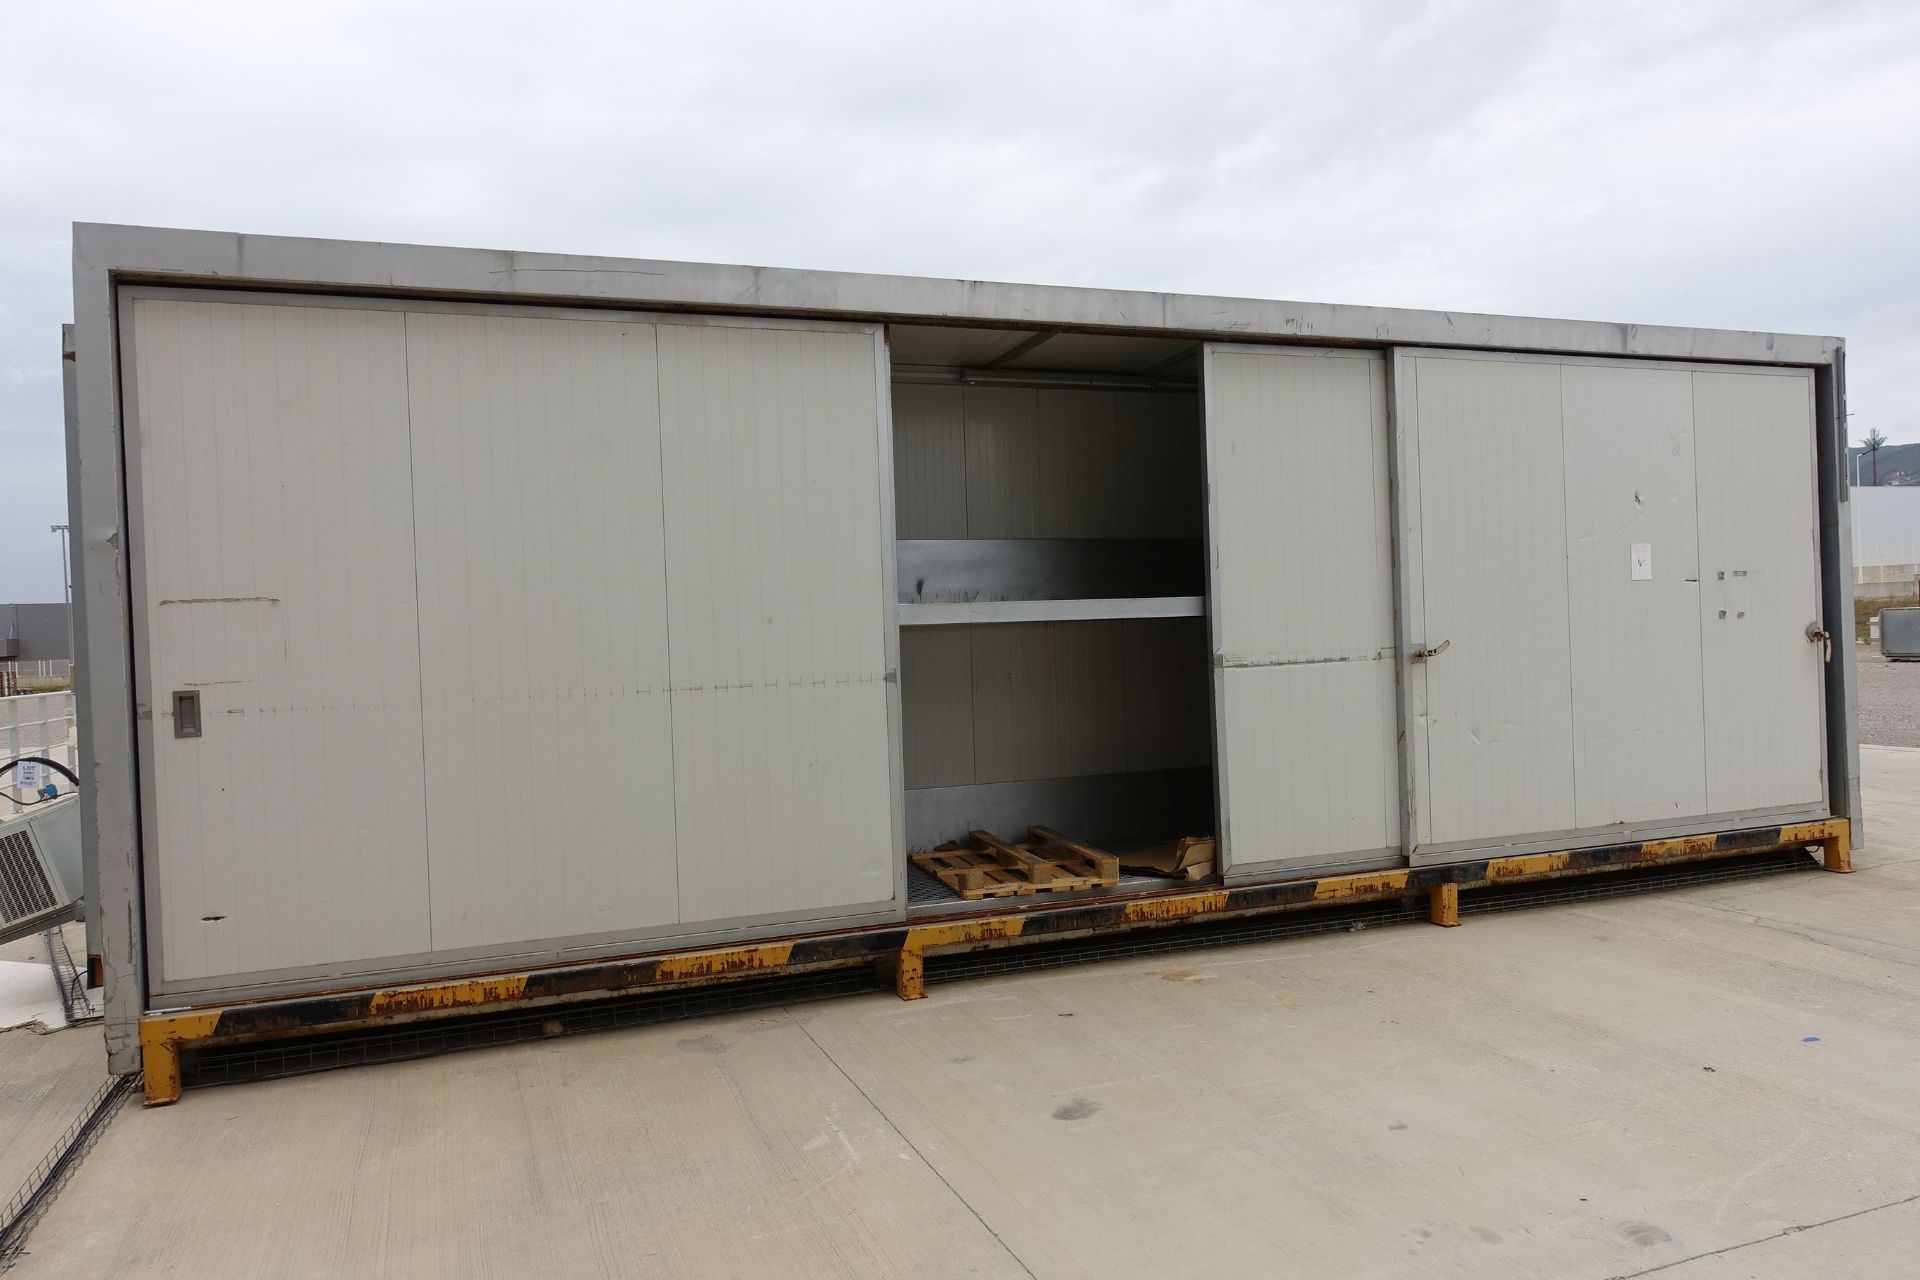 Intracon Chilled Container, 9m Long x 1.5m Deep x 3m High (aproximaely) with MDH-MF-10243 Chiller, - Image 2 of 10